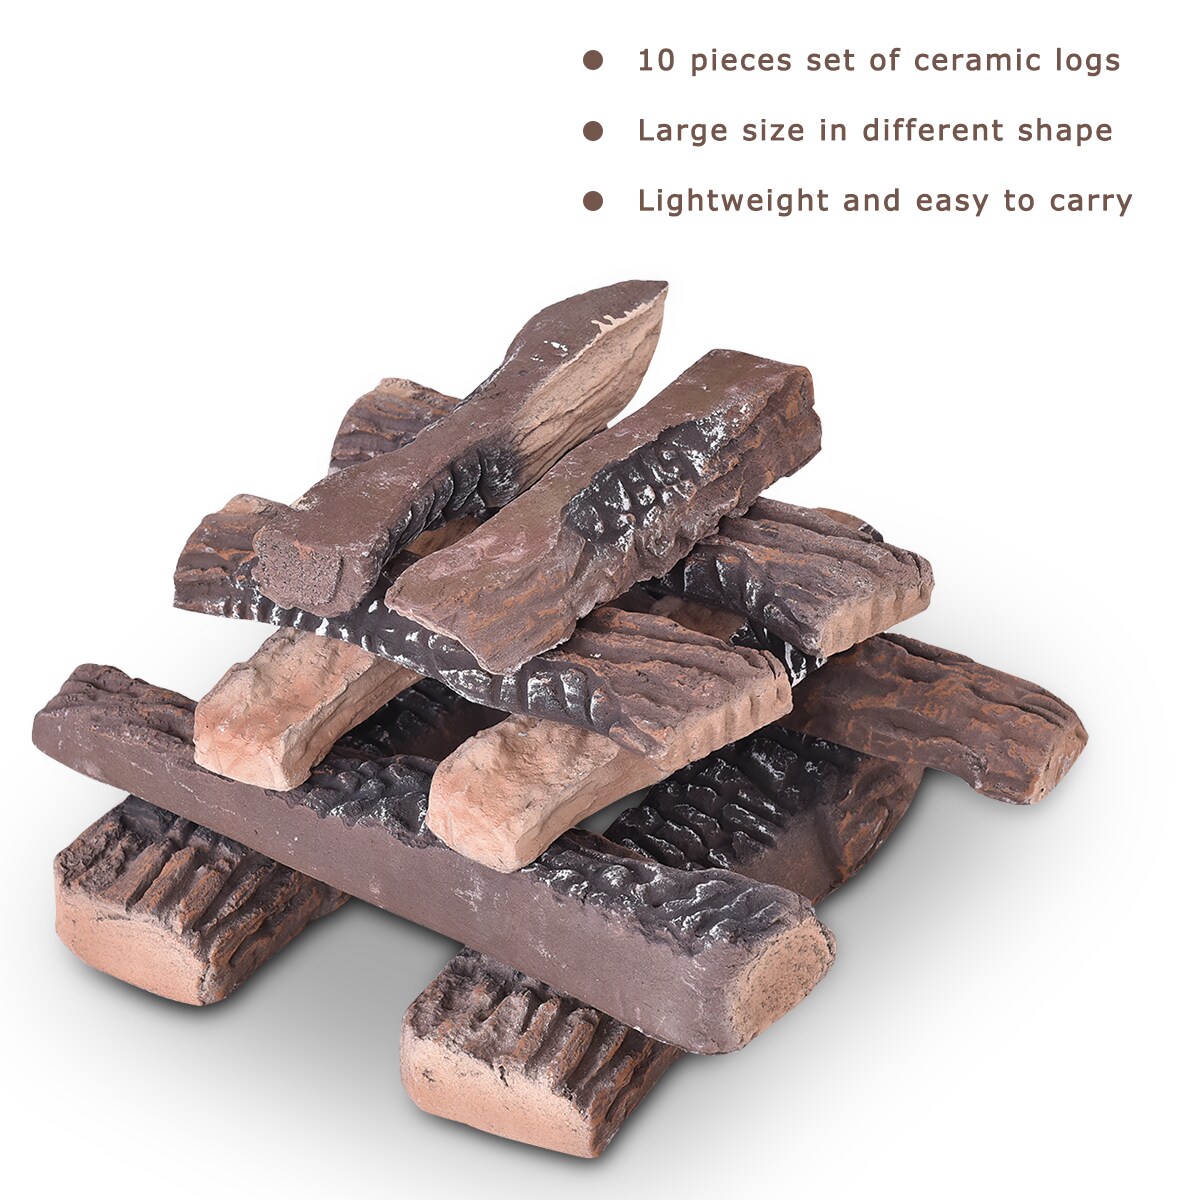 10 Large Pieces Ceramic Wood Logs for All Types of Gas Fireplace or Gas firepit 